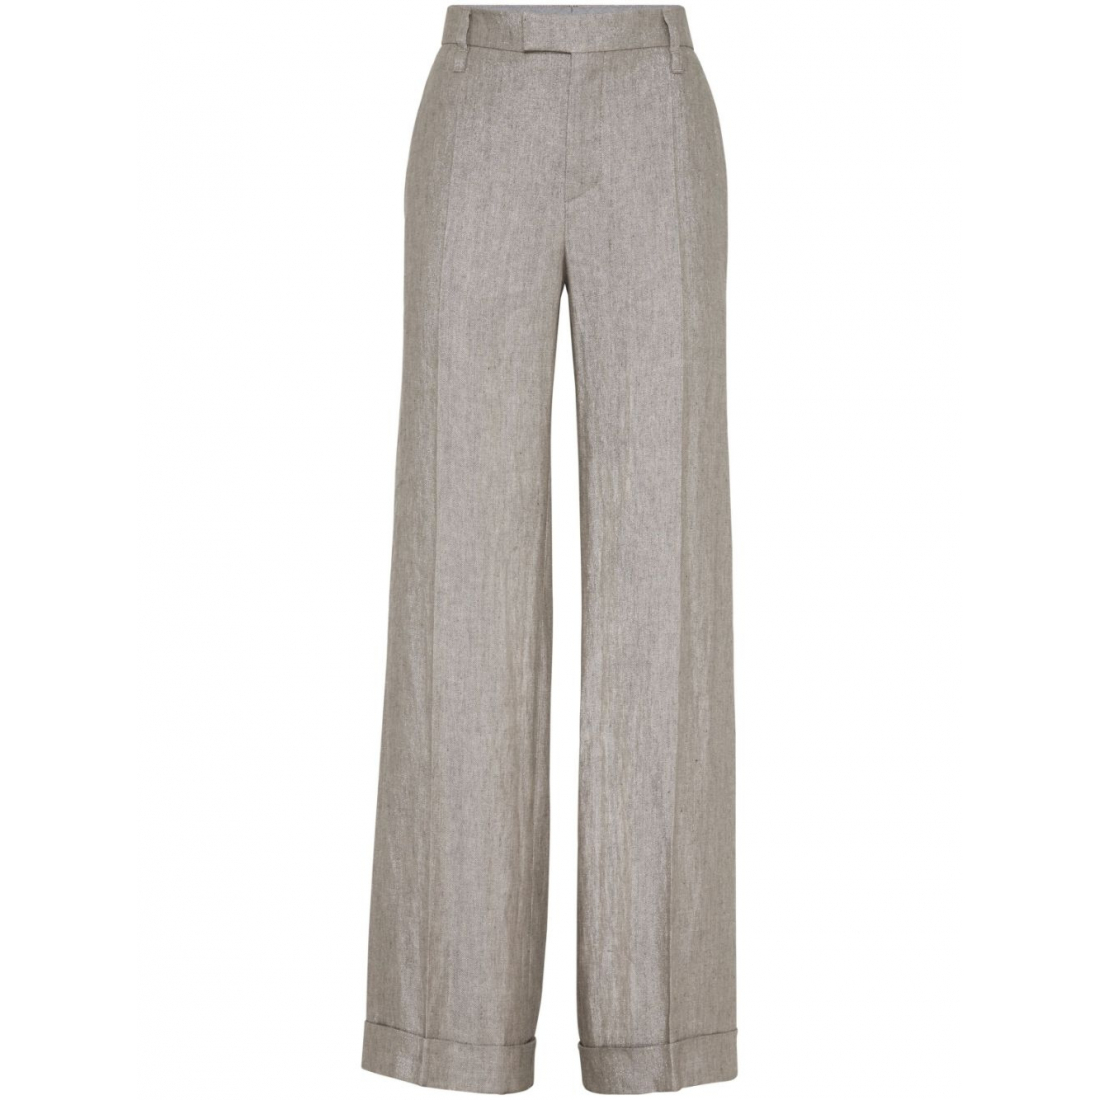 Women's 'Pressed-Crease' Trousers